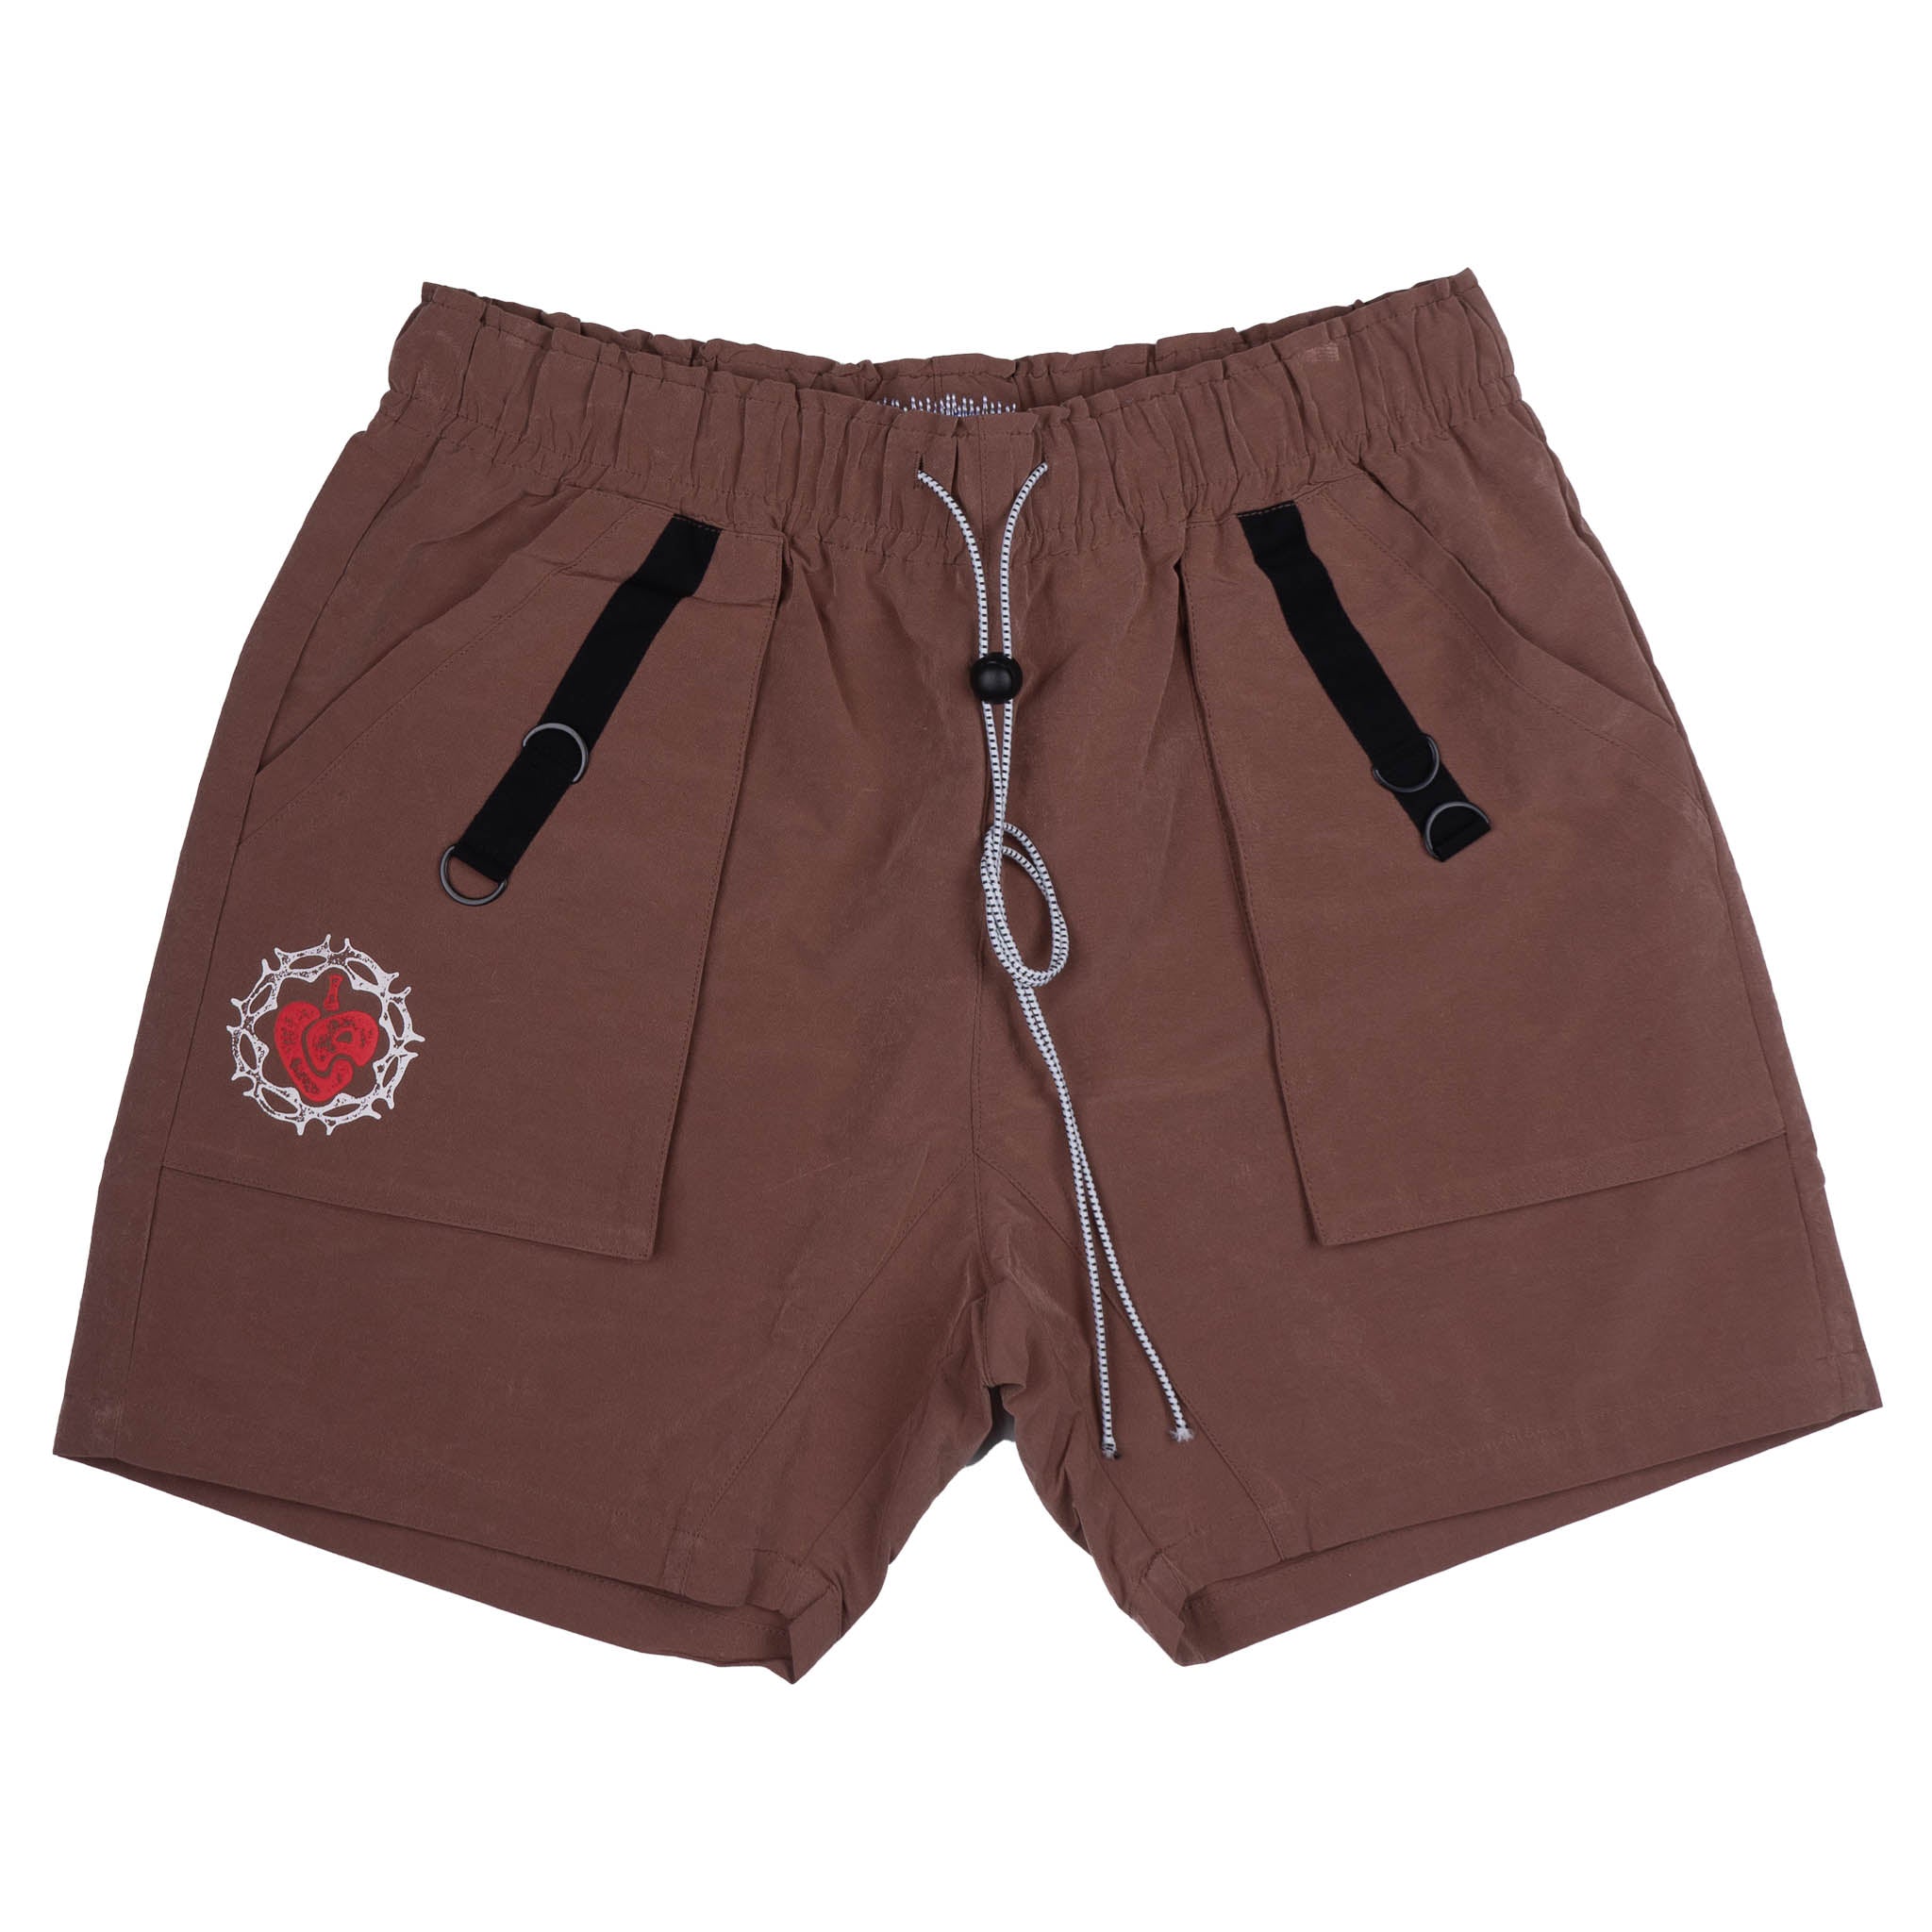 LIFTED ANCHOR CARGO SHORTS BROWN - LA22SP2-30